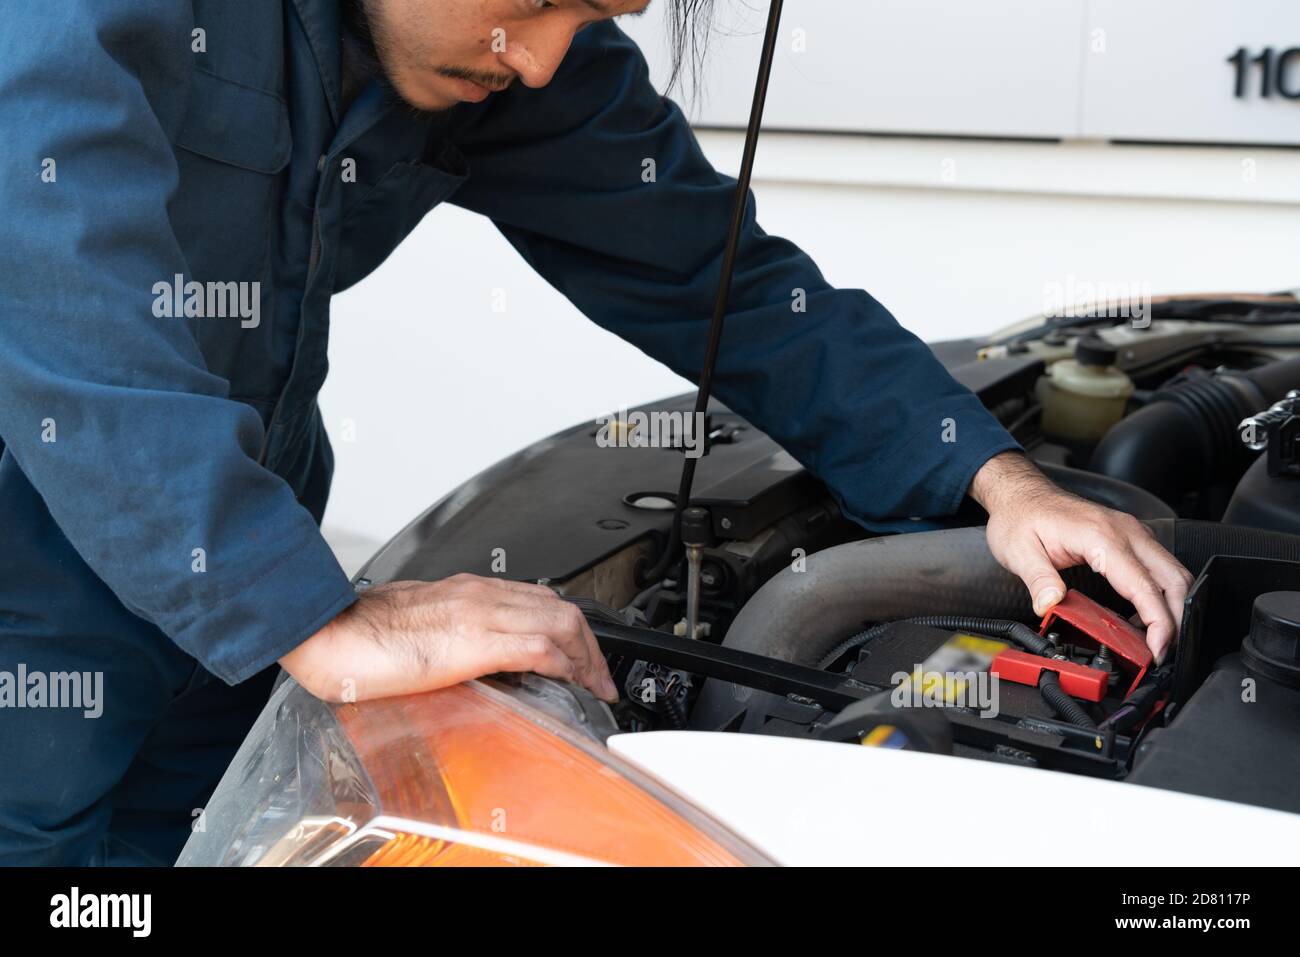 Professional mechanic providing car repair and maintenance service in auto garage. Car service business concept. Stock Photo